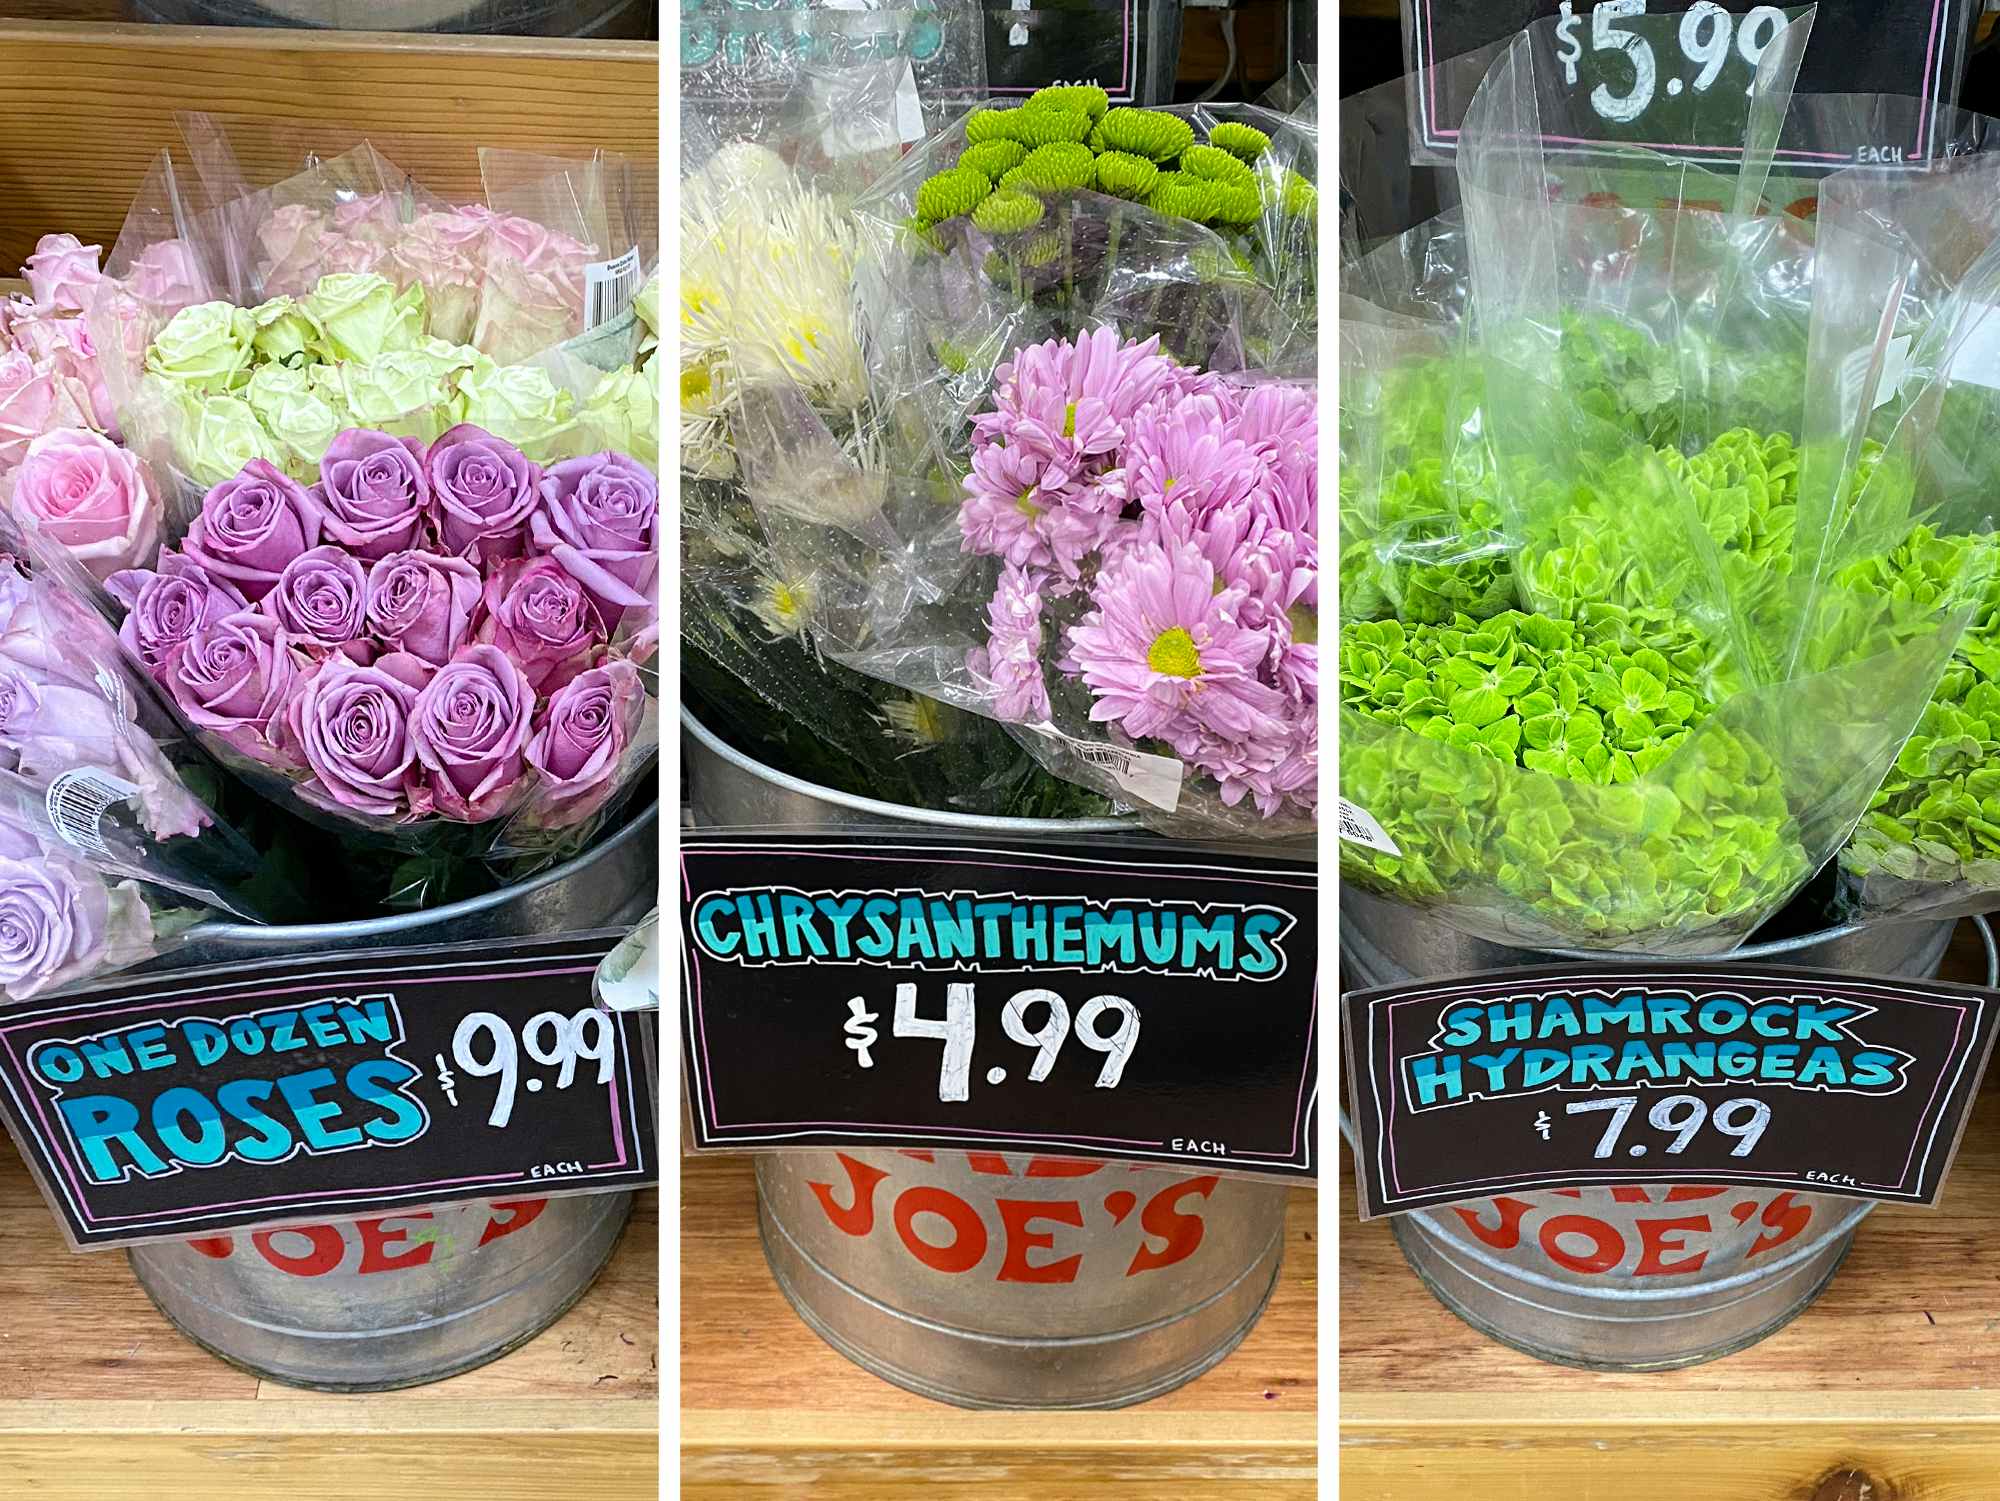 trader joes roses, chrysanthemums, and hydrangeas for arrangements